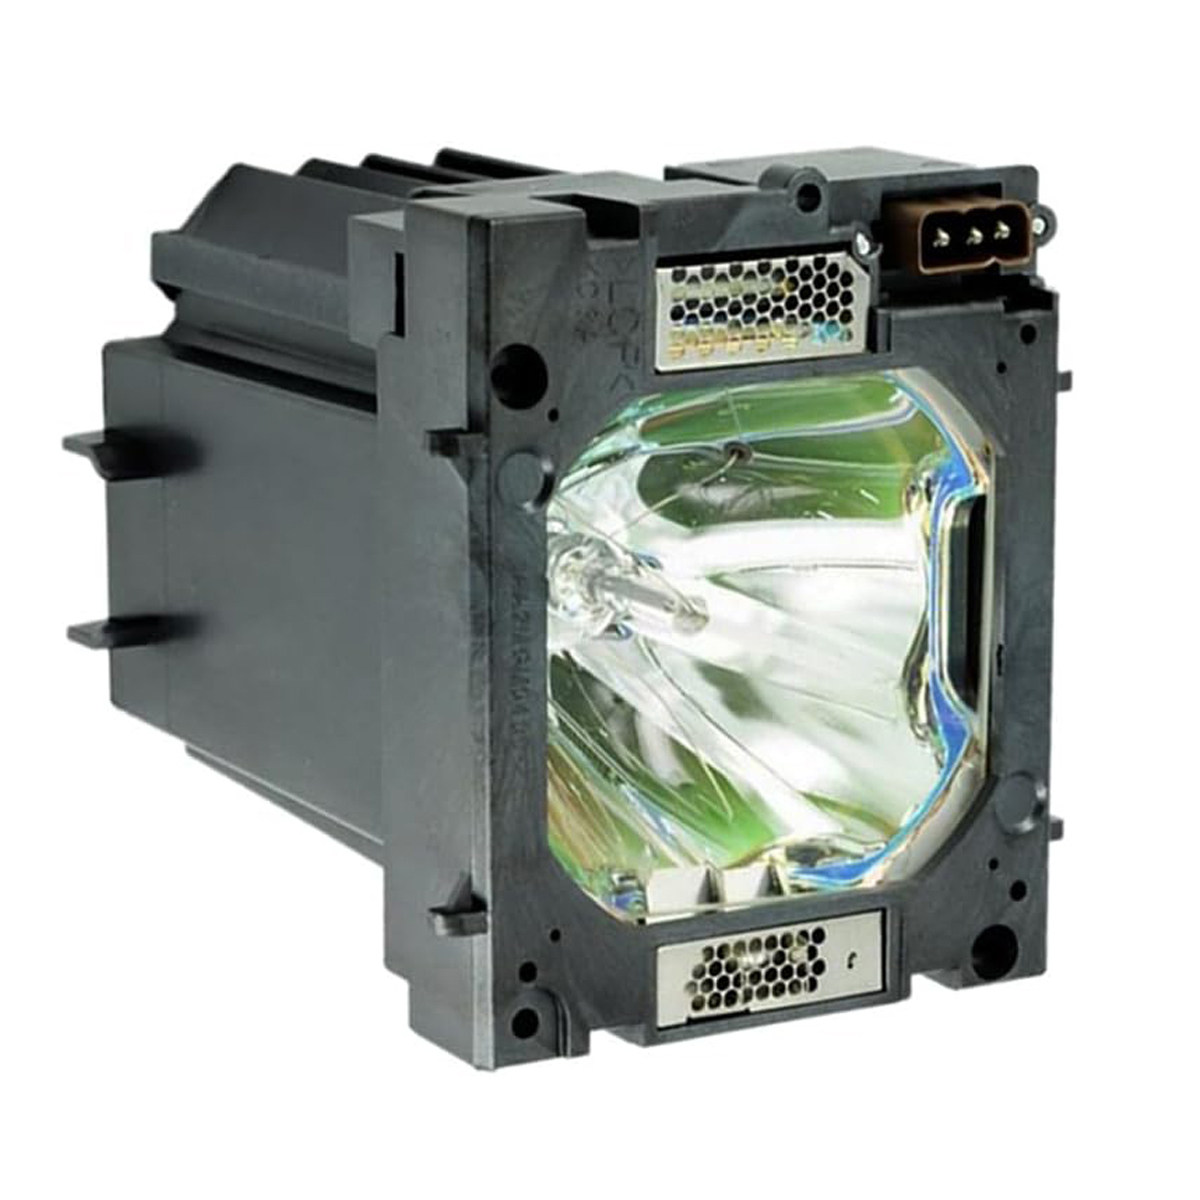 Replacement Projector lamp LV-LP29/1706B001AA For CANON Projector